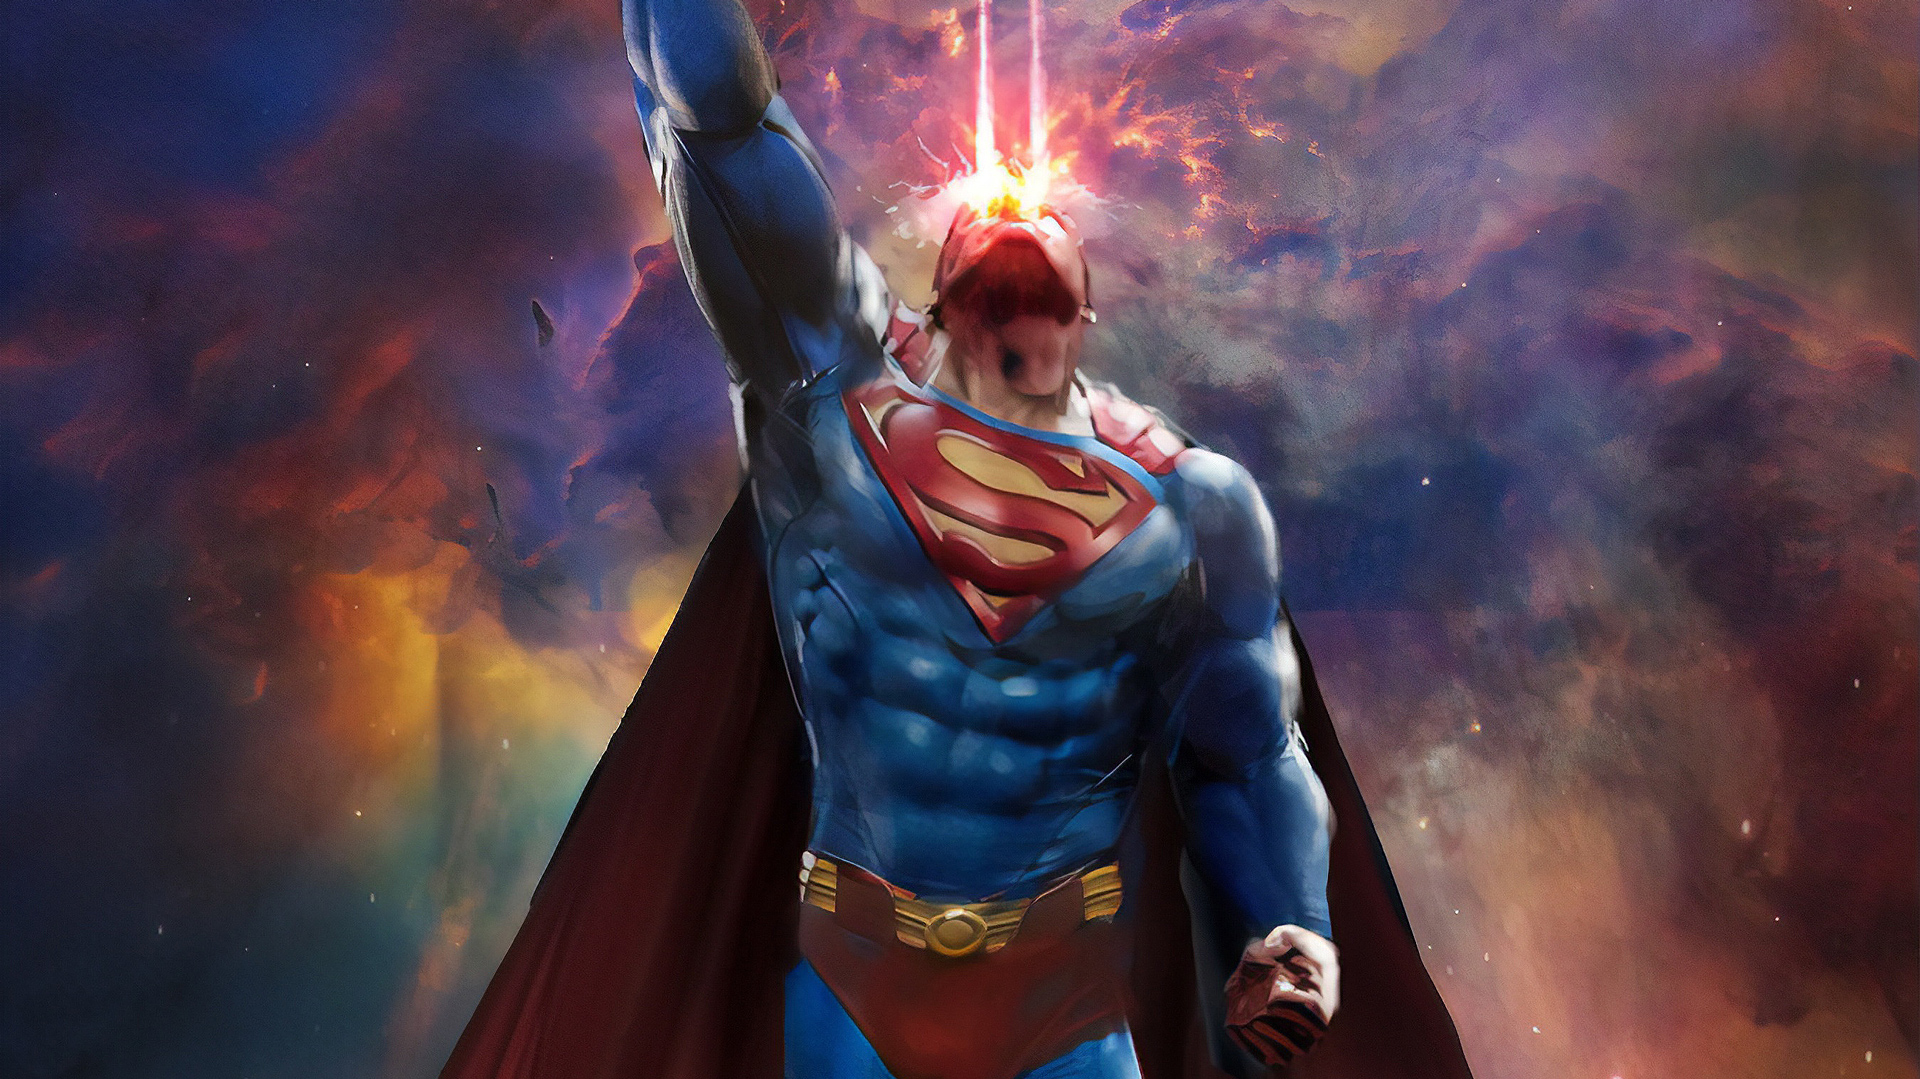 Artwork New Superman, HD Superheroes, 4k Wallpapers, Images, Backgrounds, Photos and Pictures